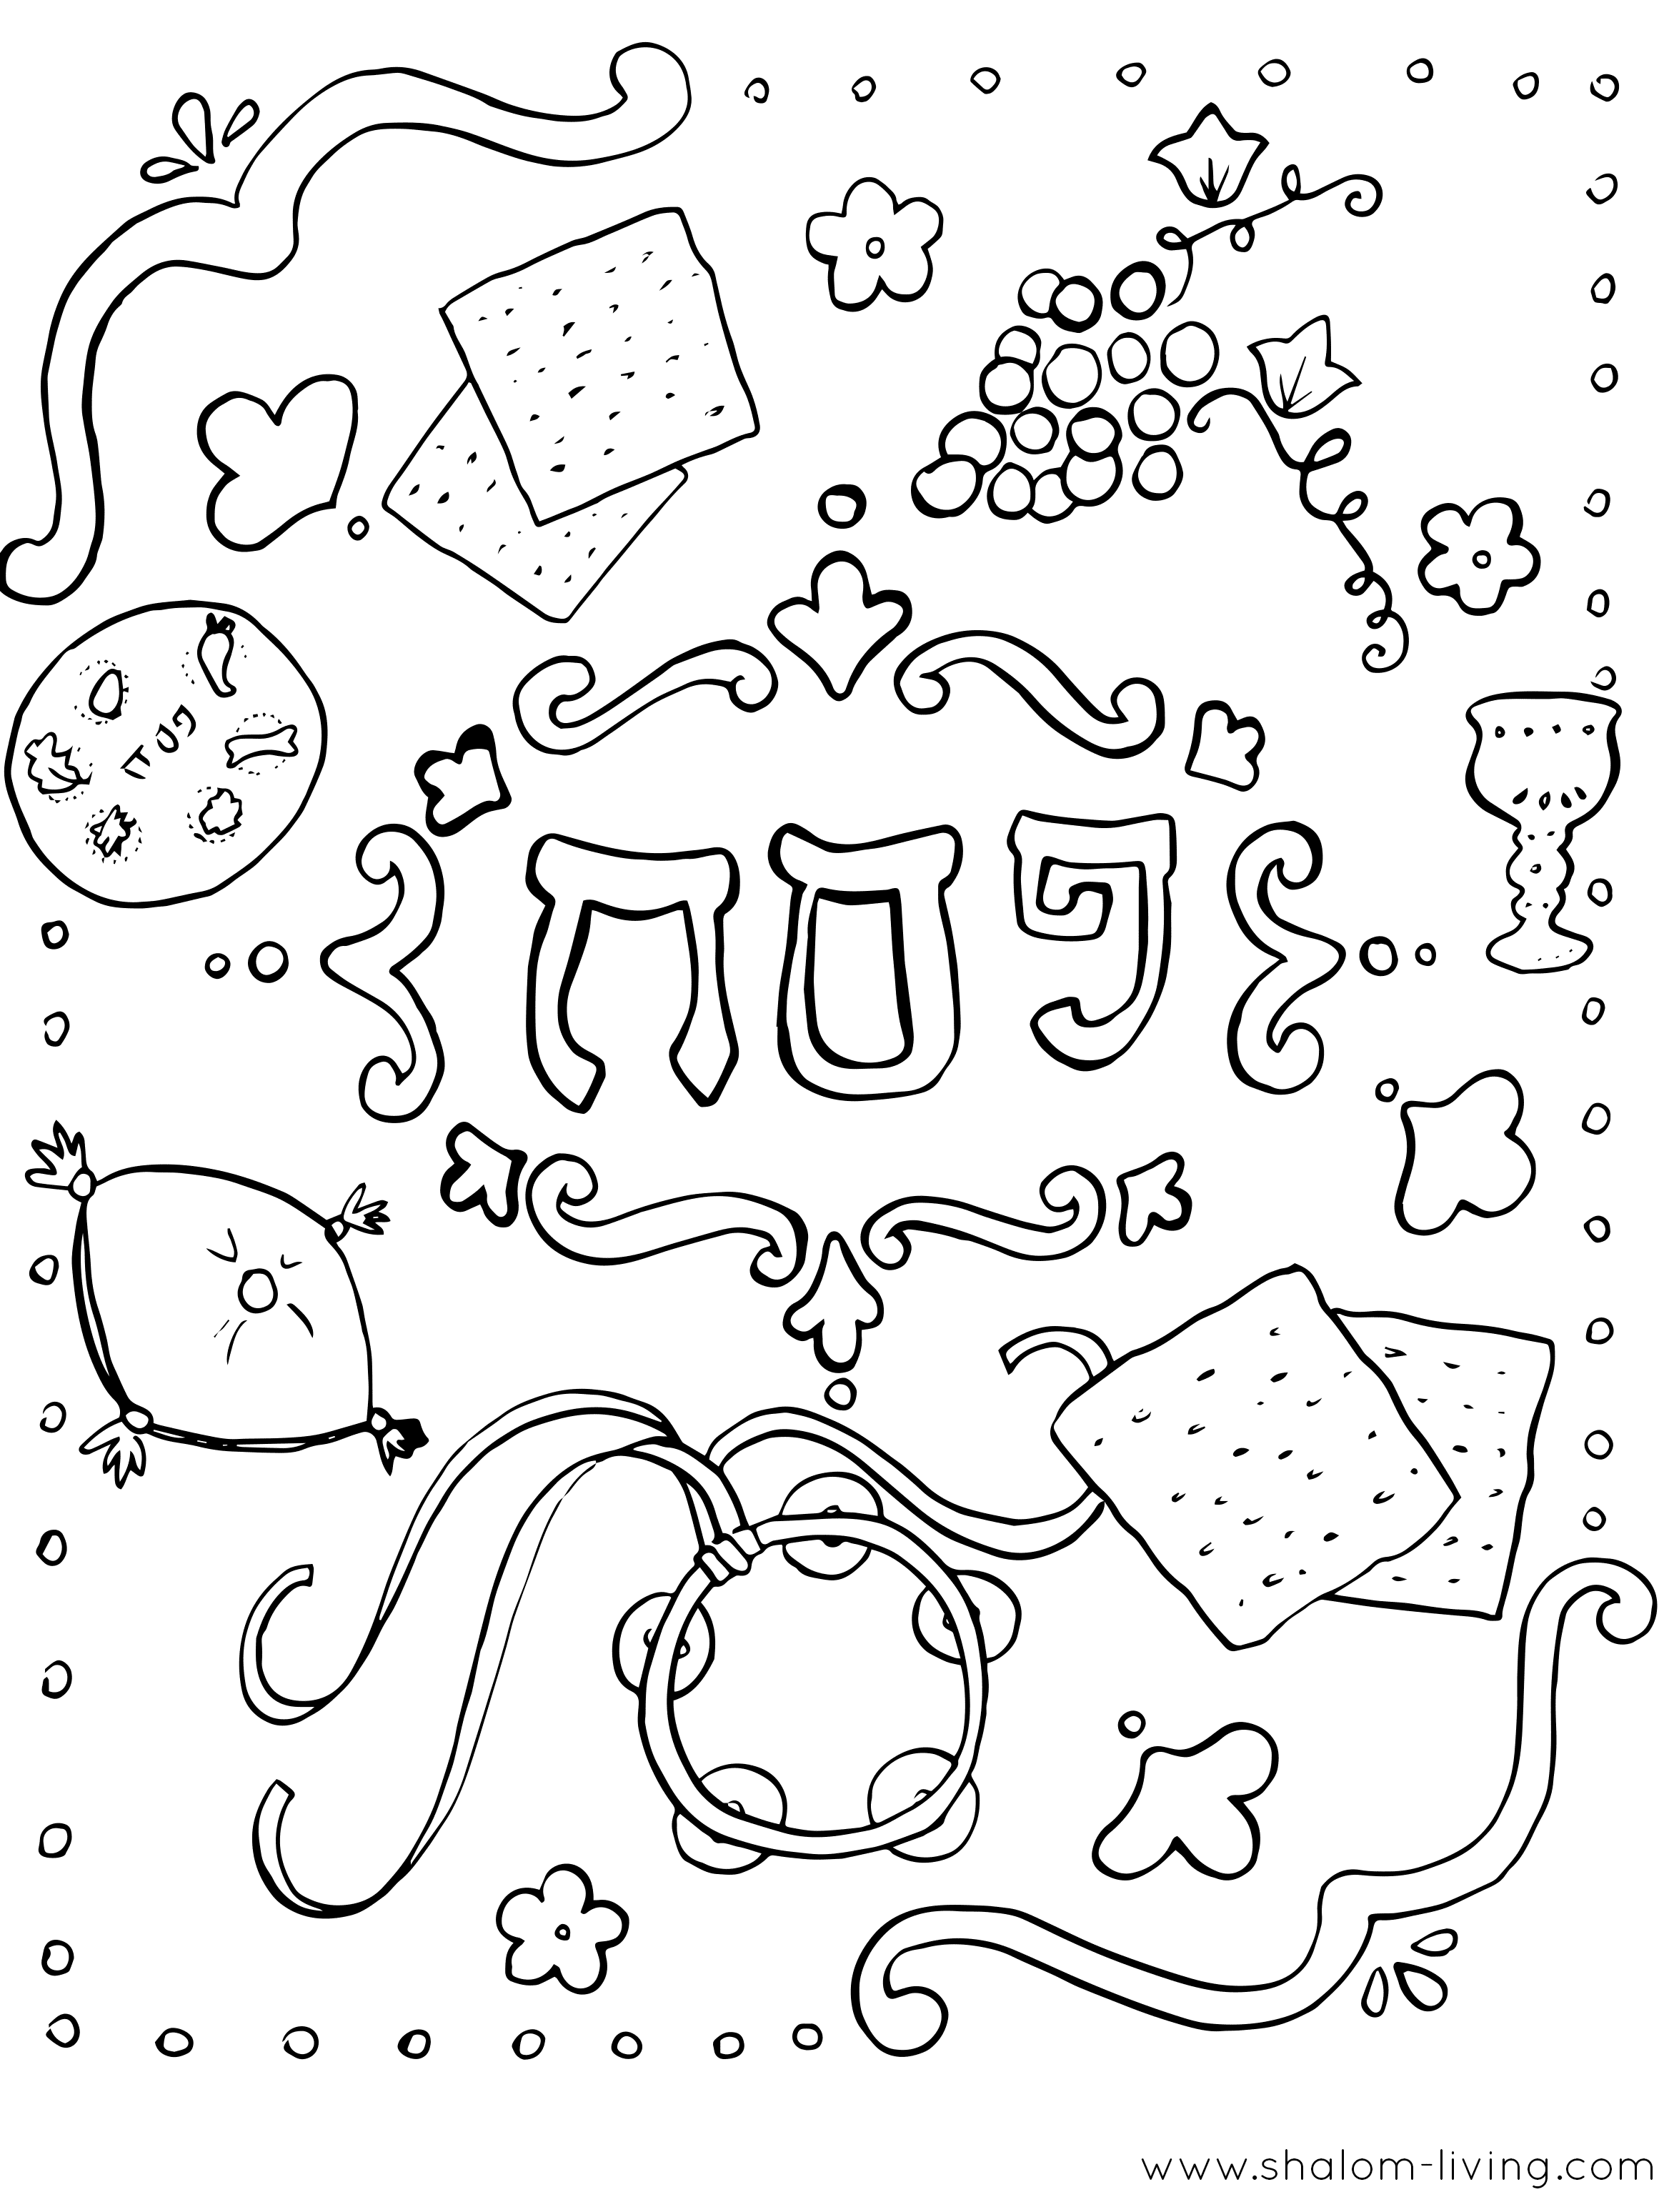 Free Printable Passover Coloring Pages